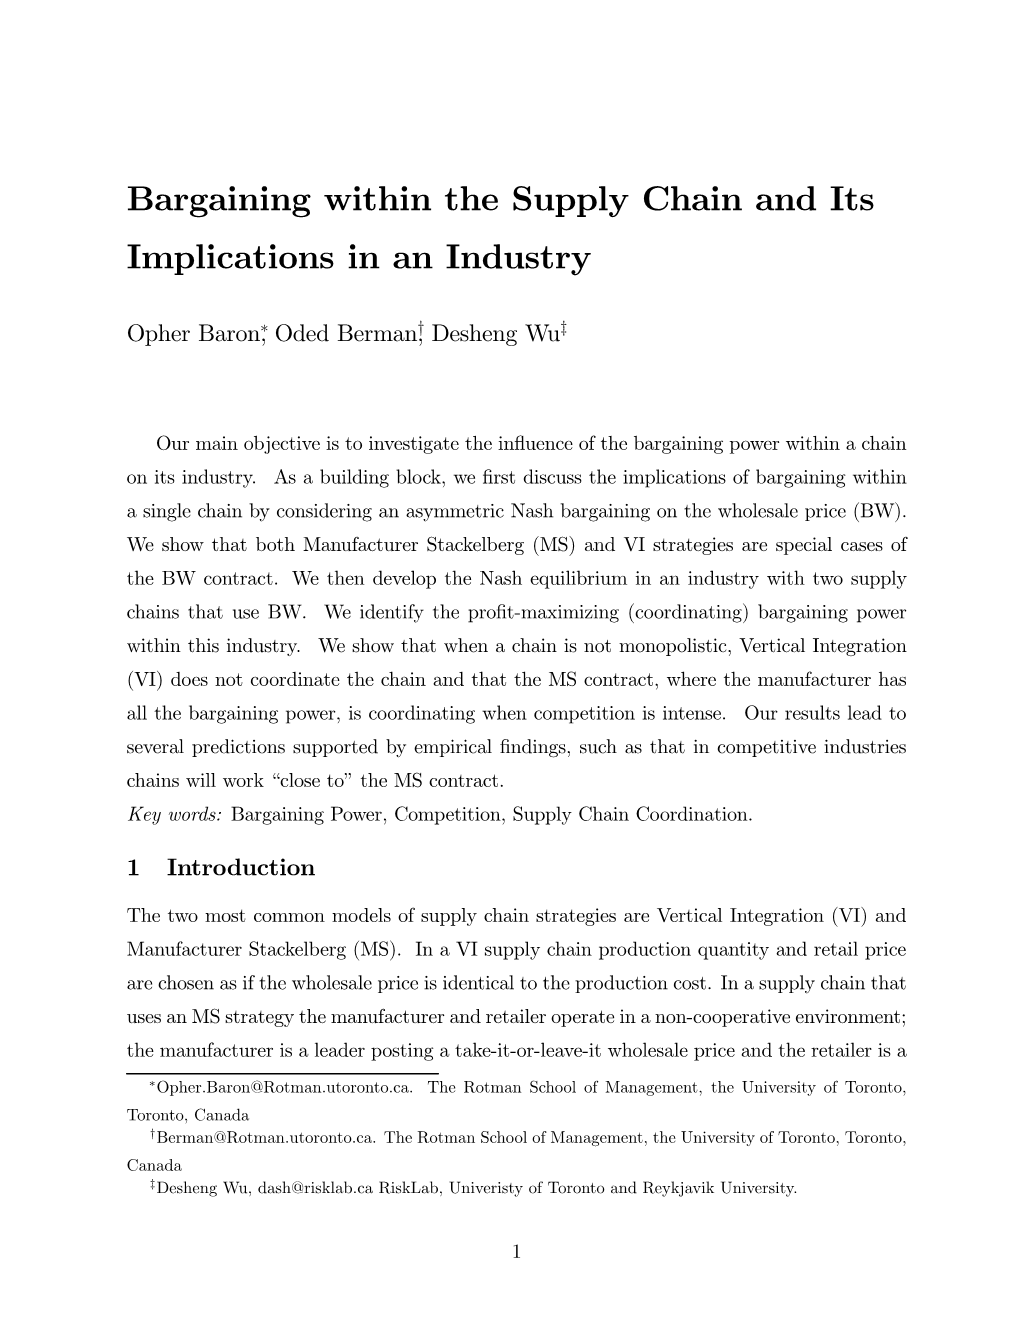 Bargaining Within the Supply Chain and Its Implications in an Industry